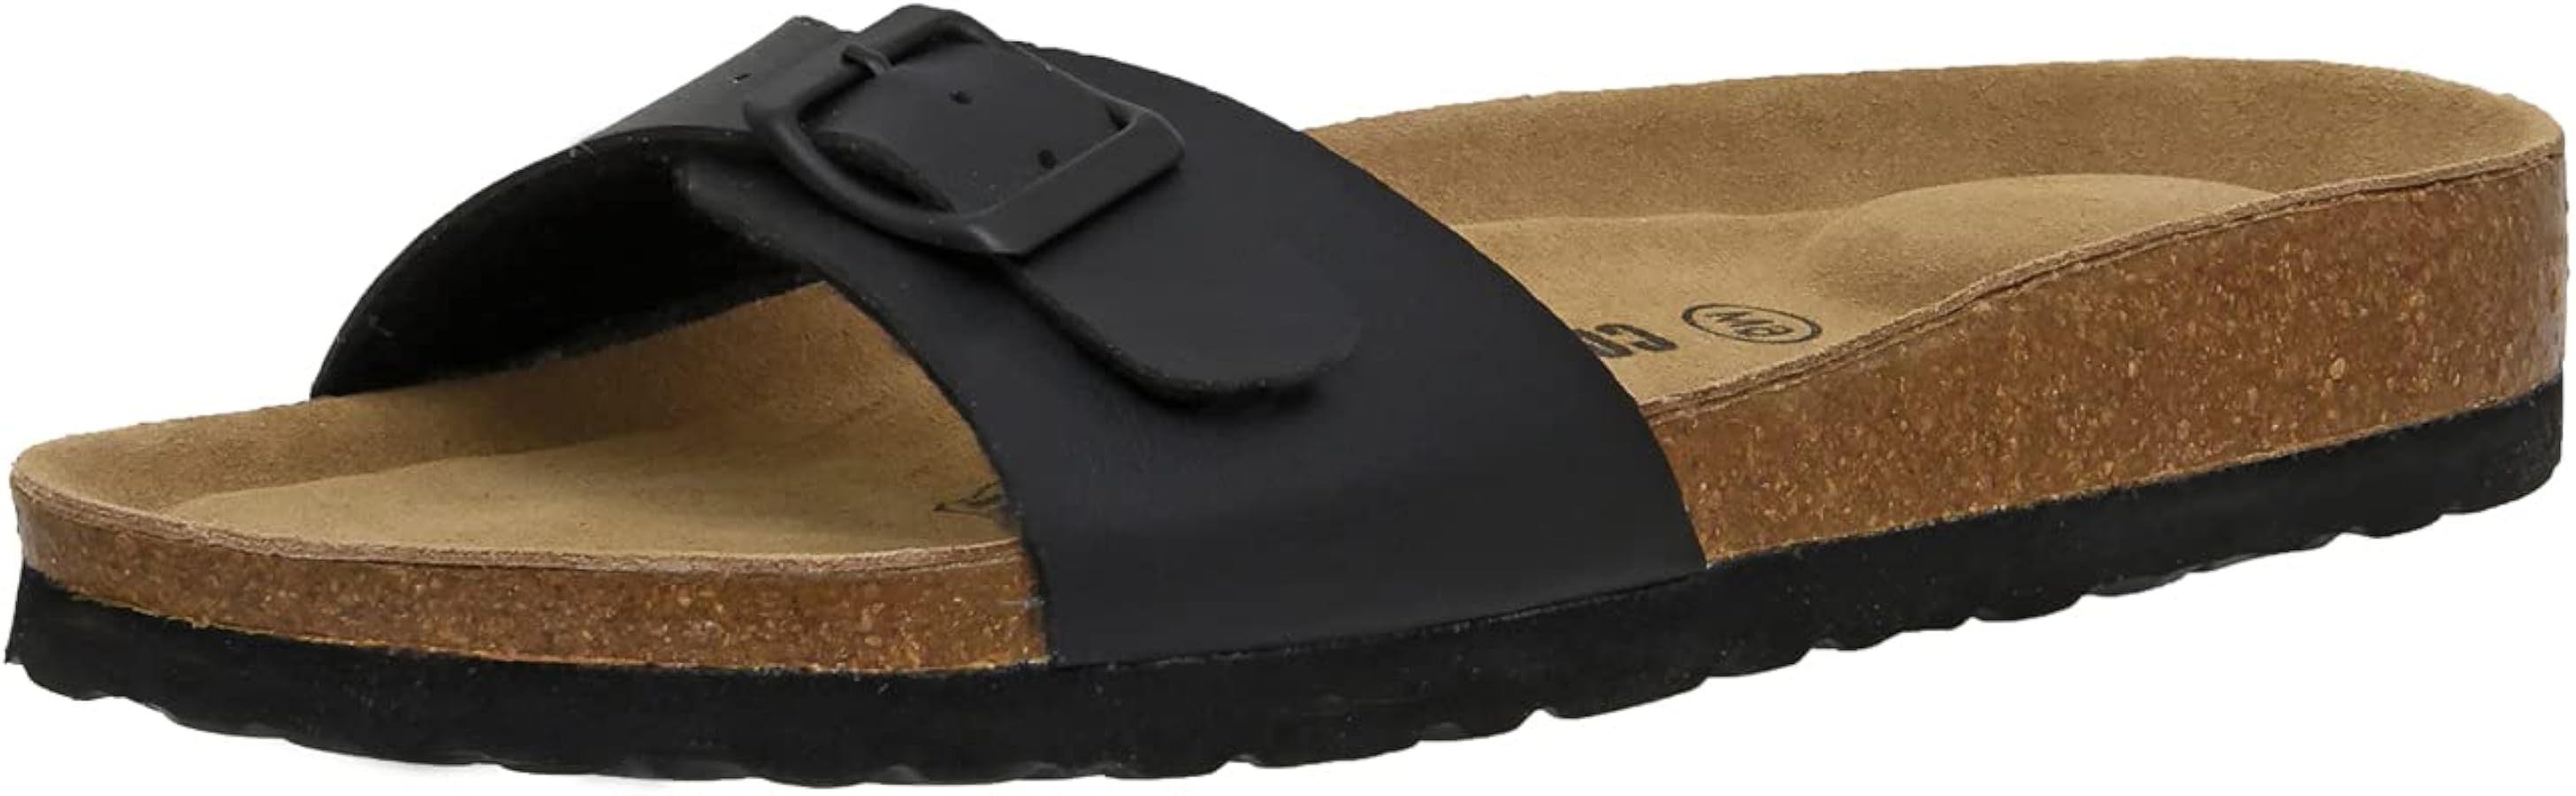 CUSHIONAIRE Women's Luca Cork footbed Sandal with +Comfort | Amazon (US)